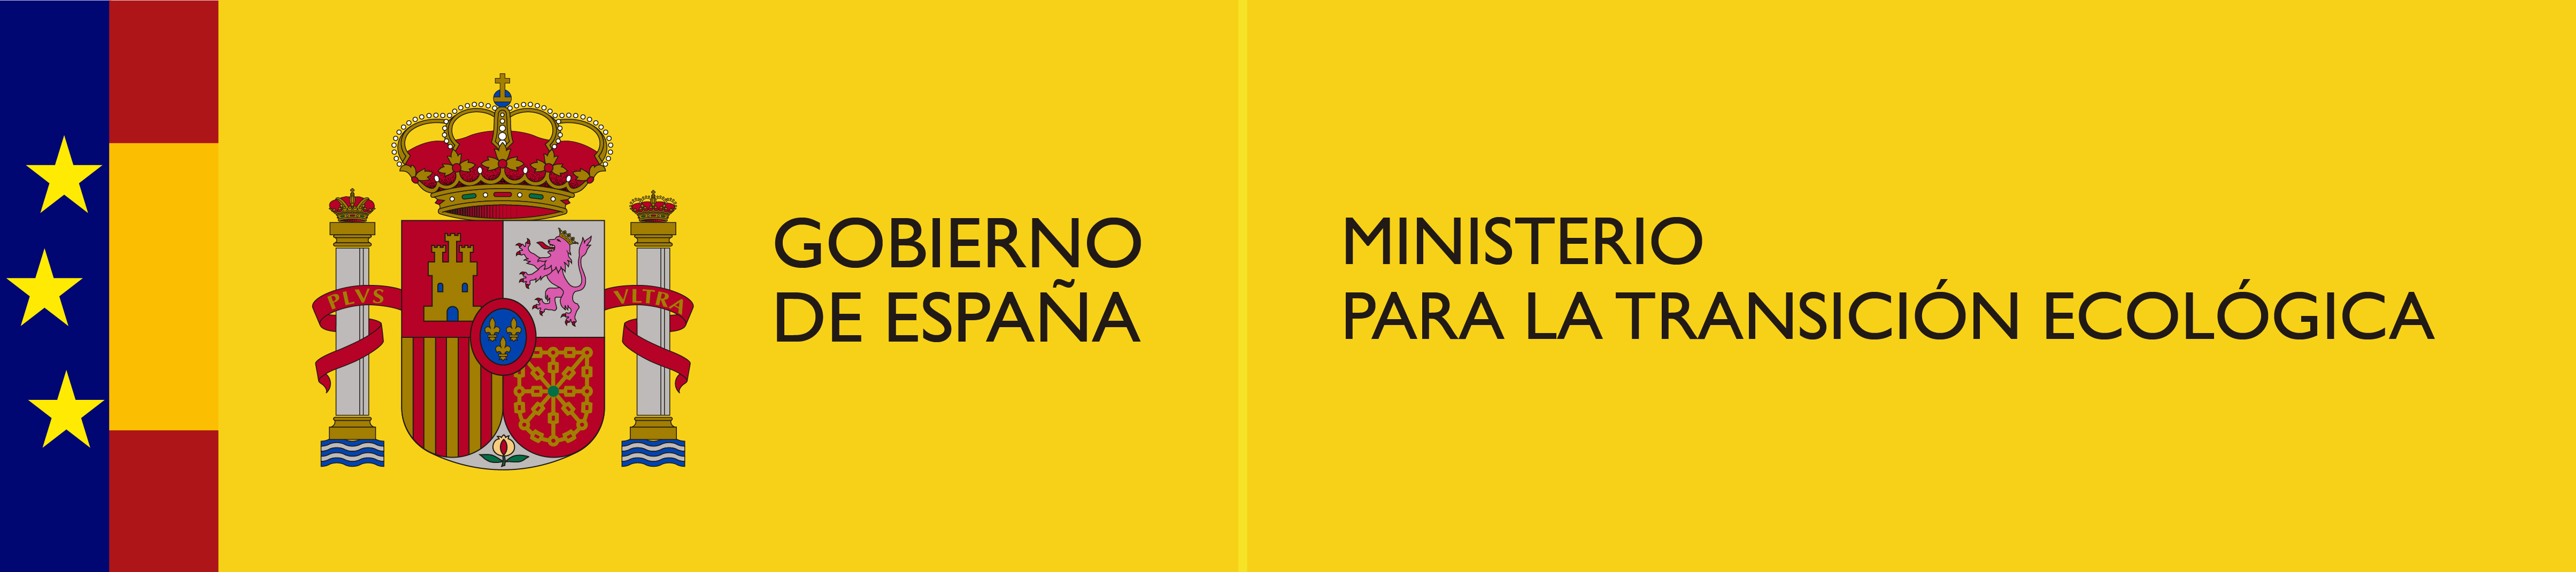 Spanish Ministry of Ecological Transition